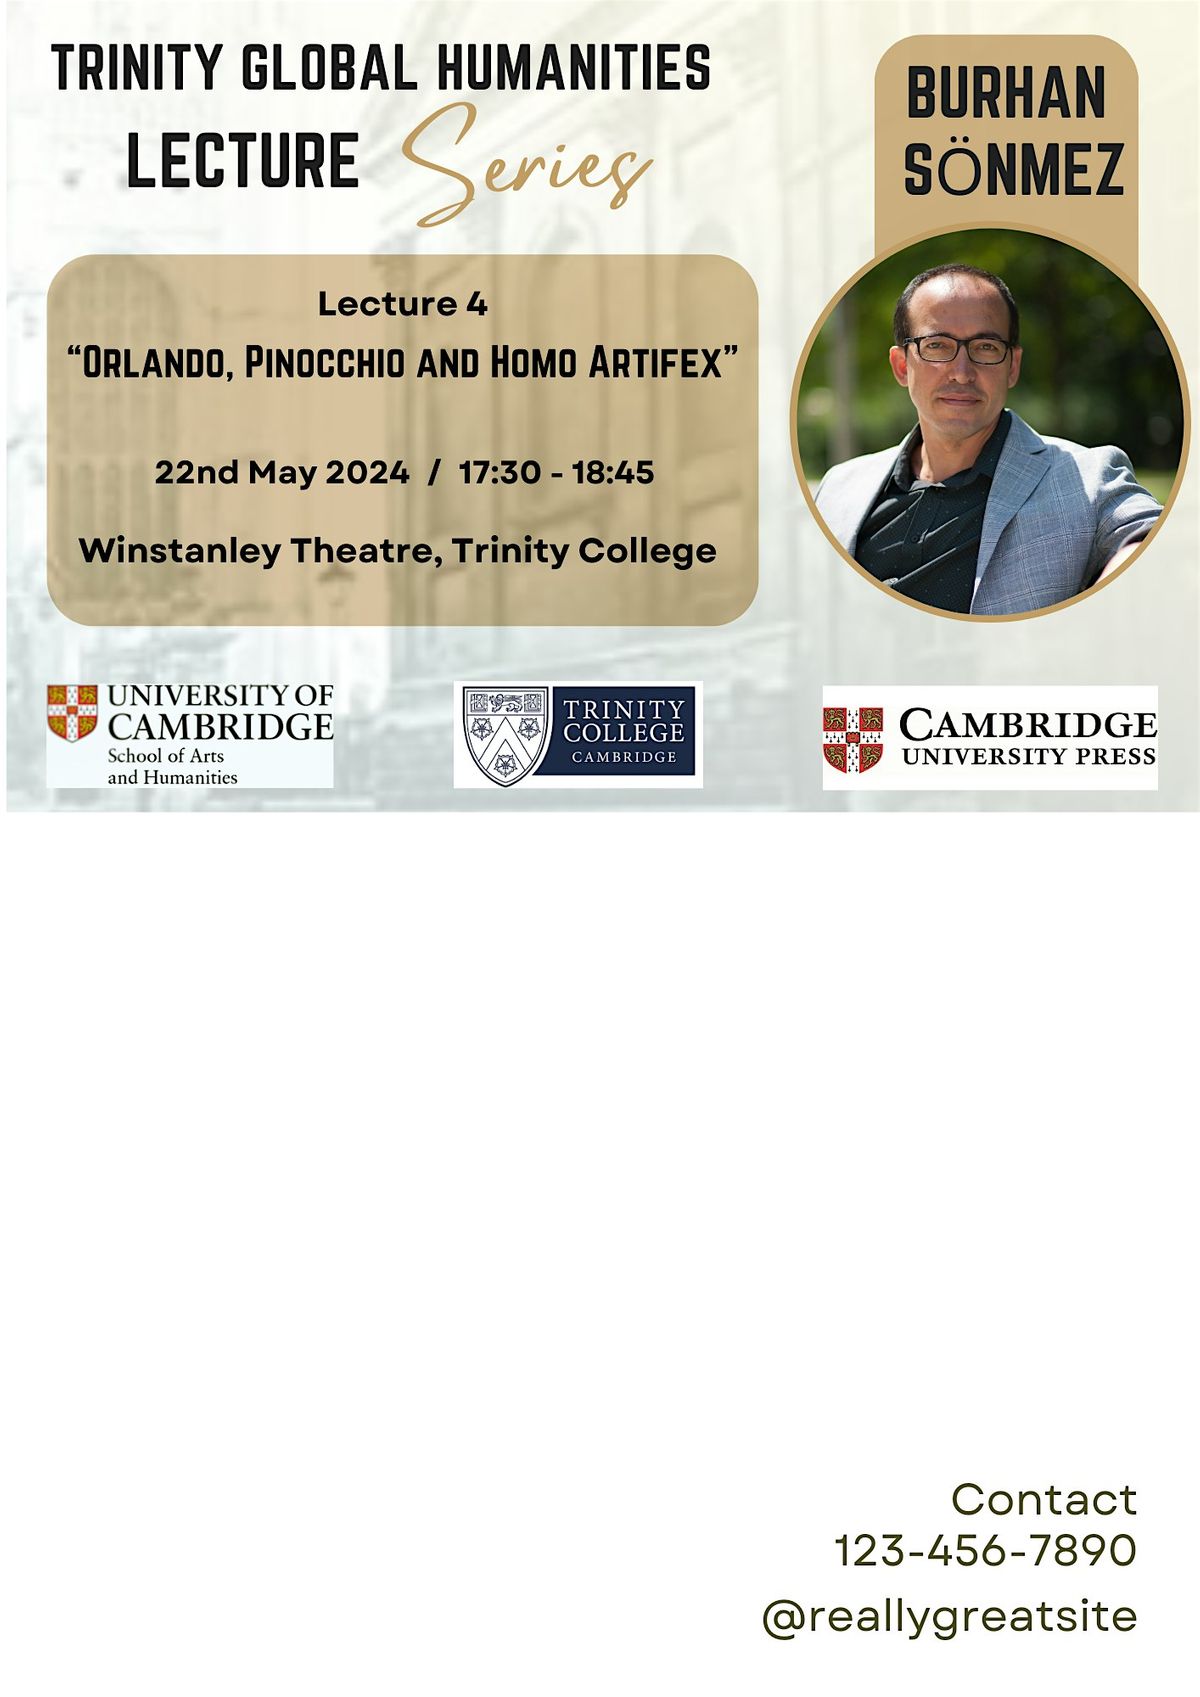 TRINITY GLOBAL HUMANITIES LECTURES - "Orlando, Pinocchio and Homo Artifex"